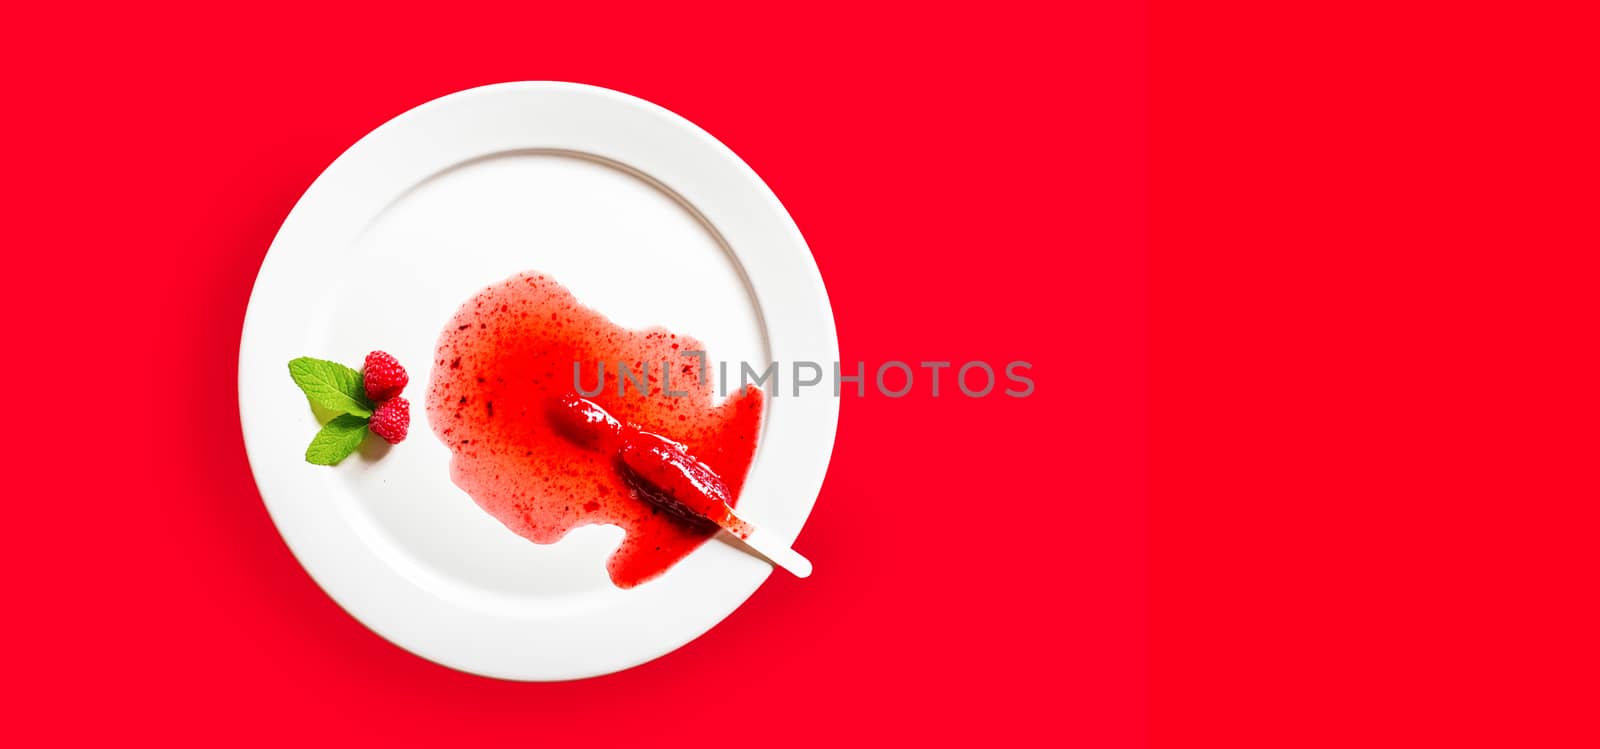 Delicious defrosted strawberry popsicles on white round dish over red background by raferto1973